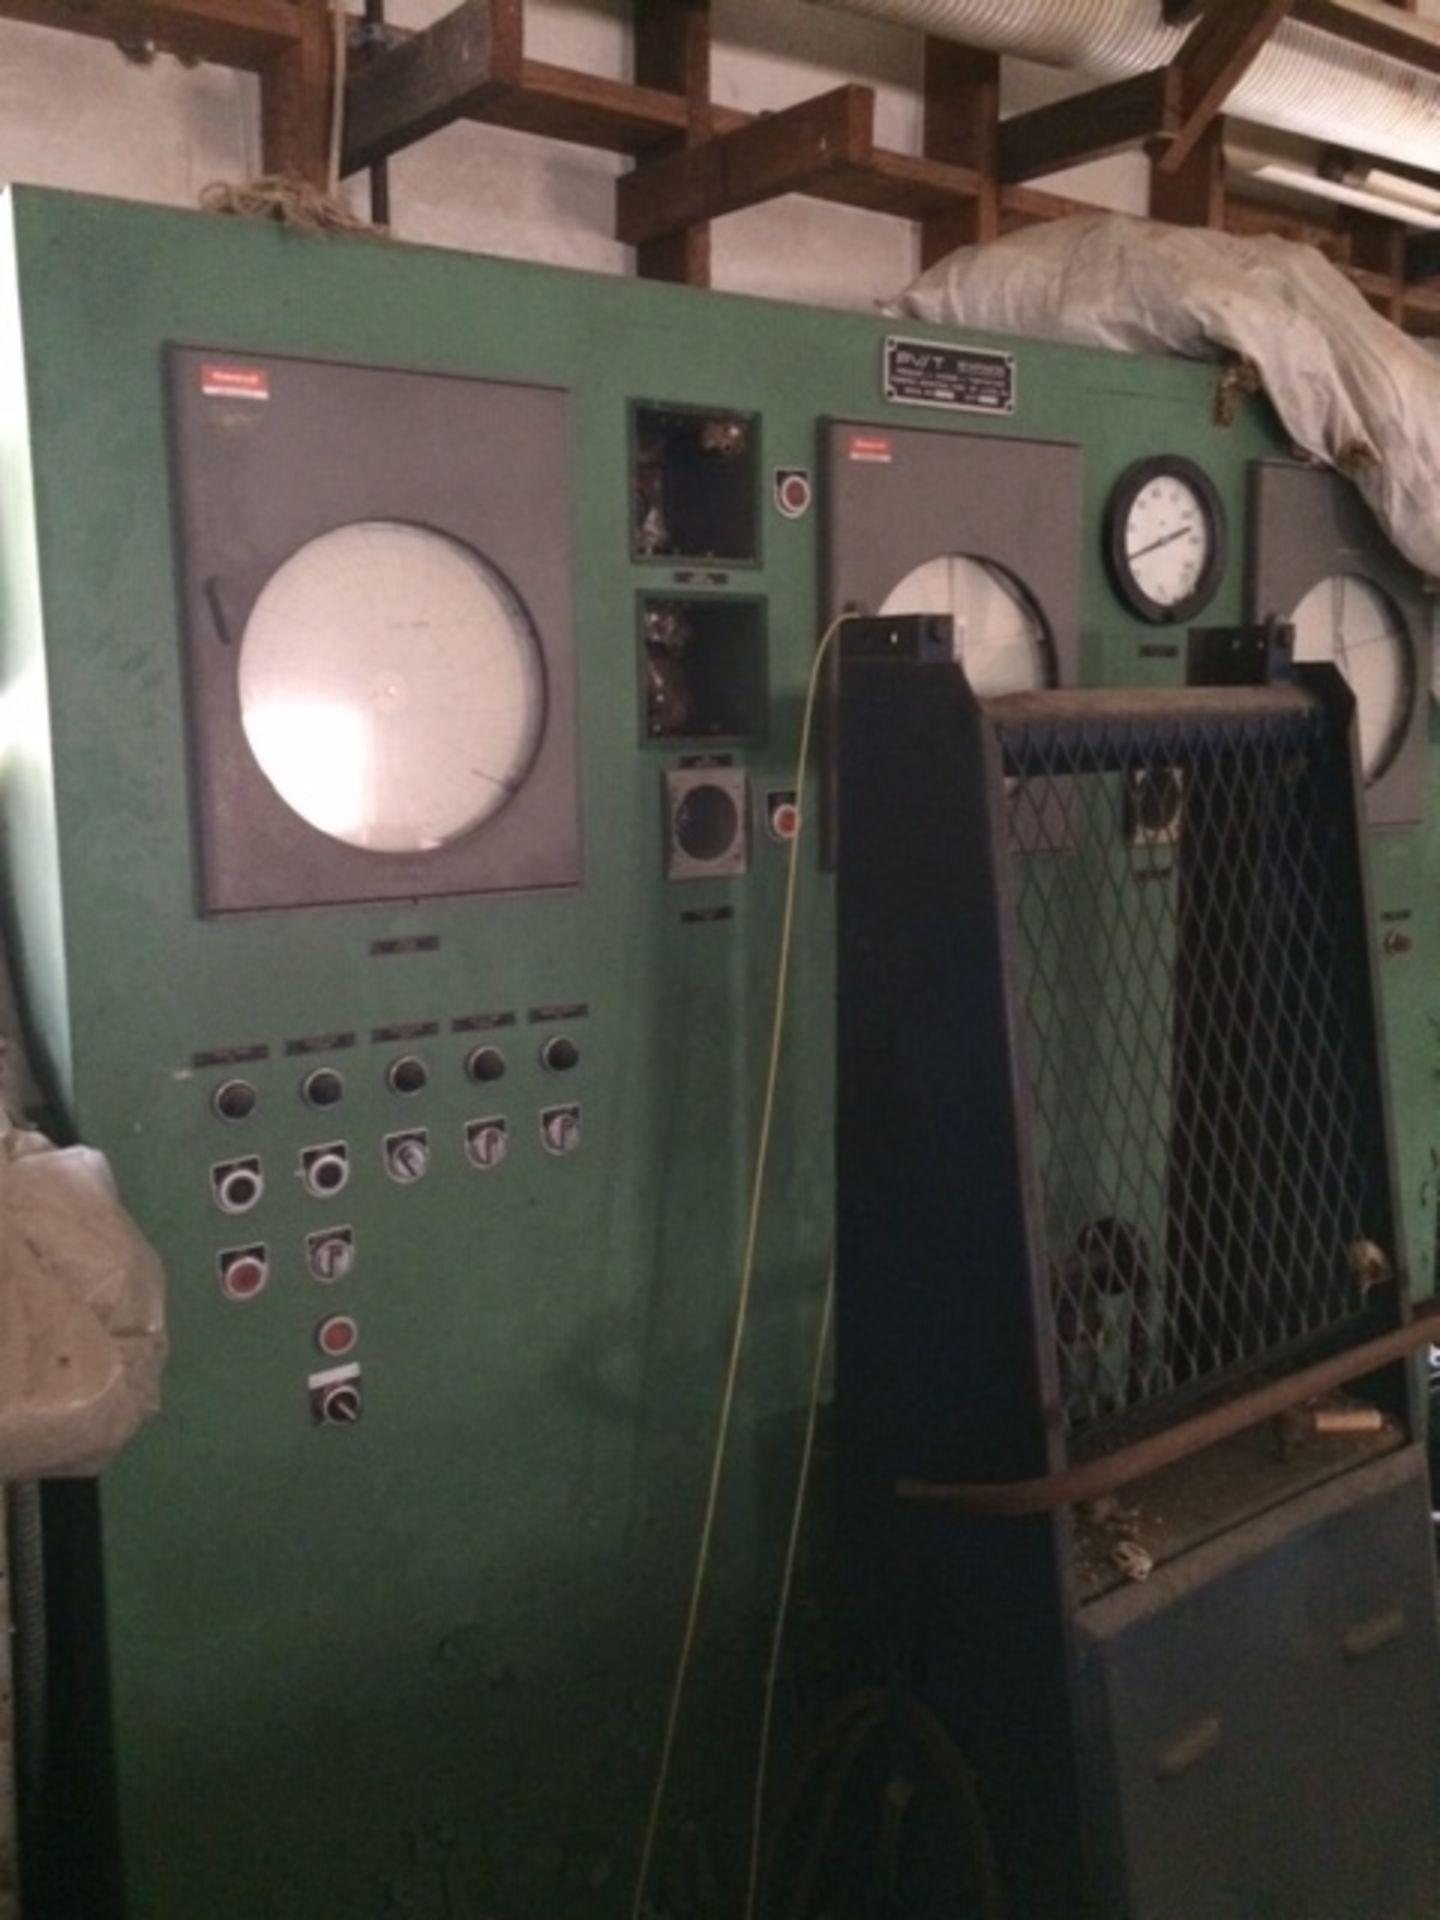 Industrial Autoclave Unit – 23 ft. x 70’’ – Excellent Condition, Fully Functional (details below) - Image 5 of 13